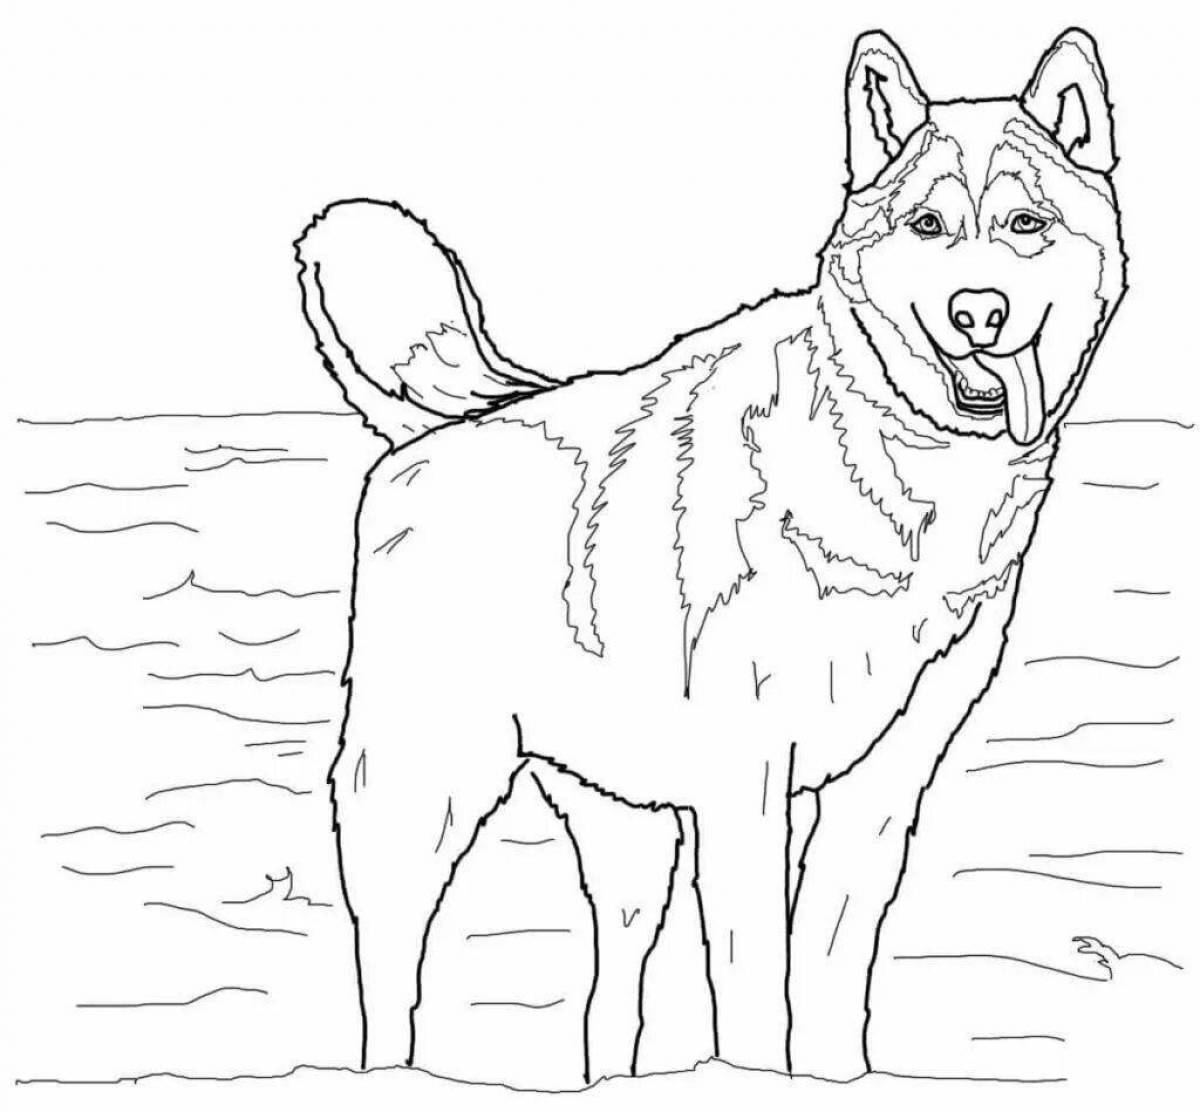 Amazing husky coloring book for kids